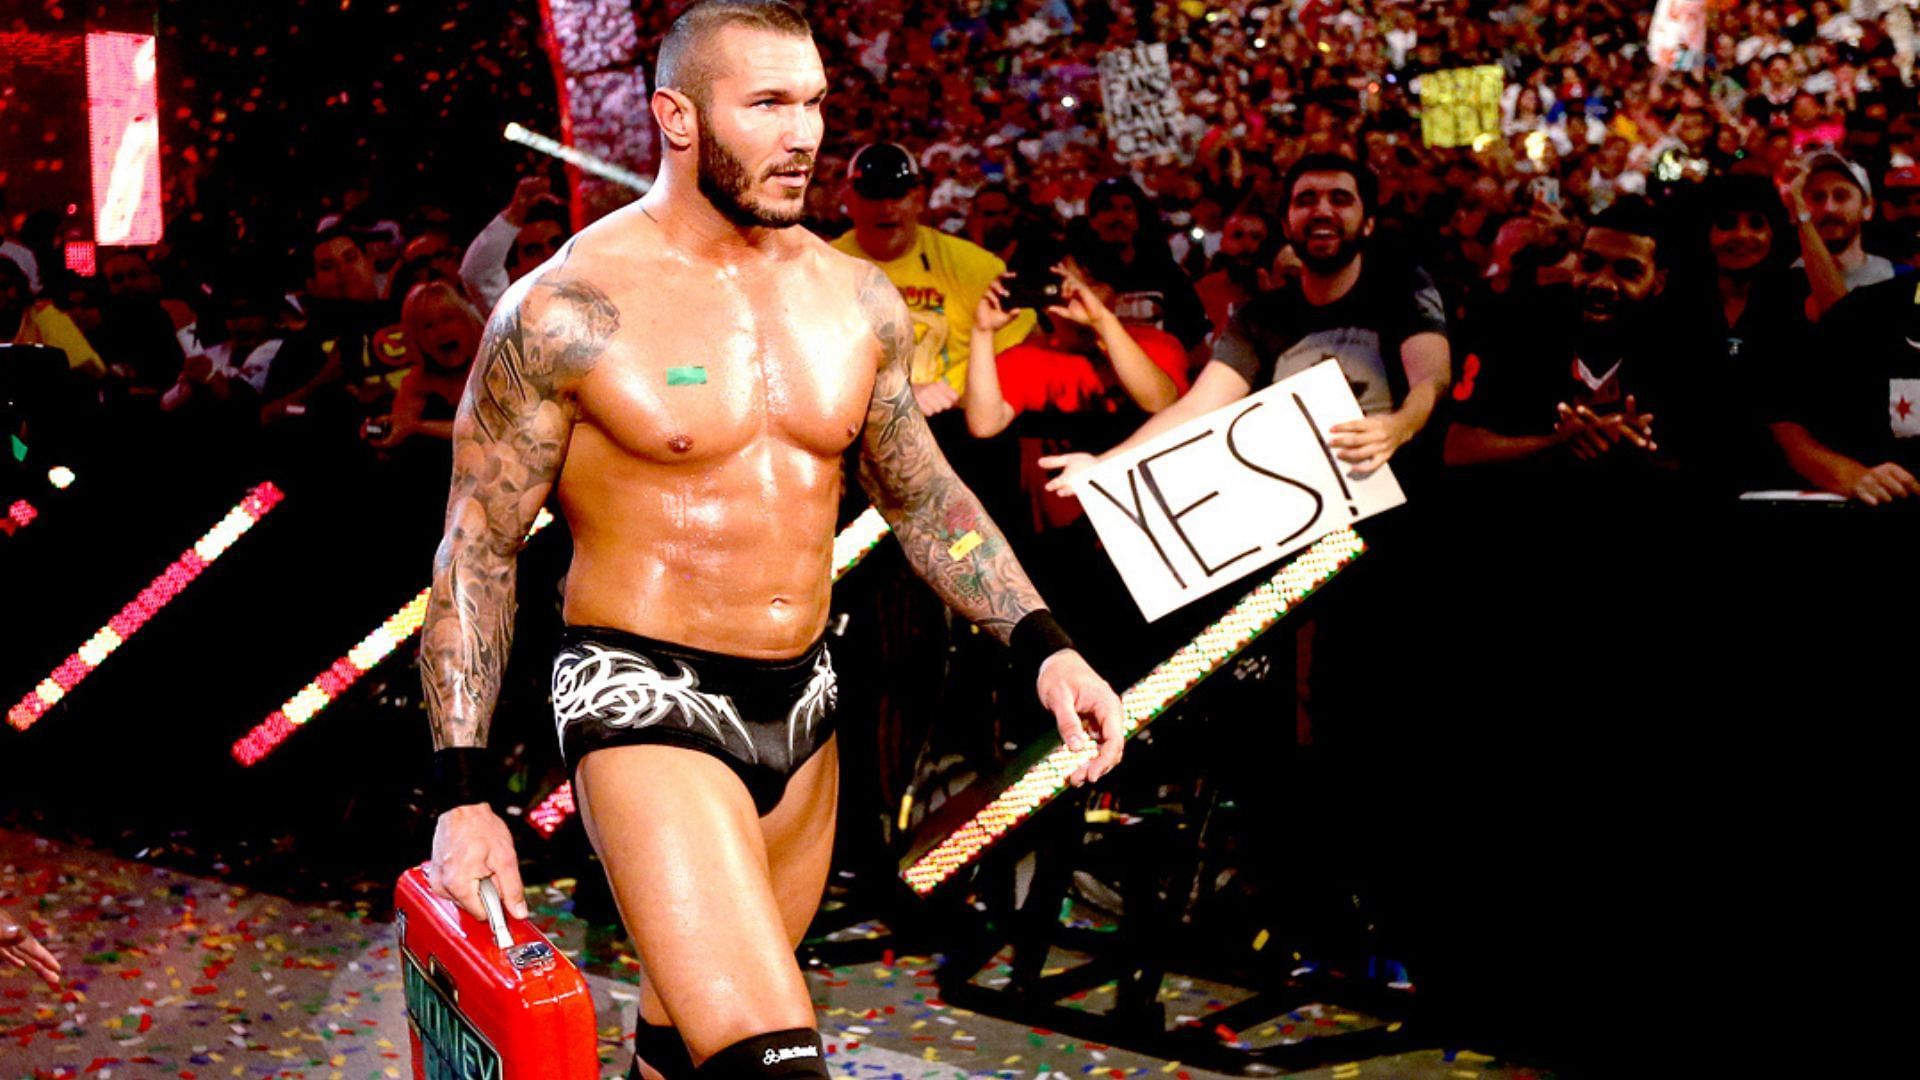 Randy Orton has competed at multiple SummerSlam events over the years.